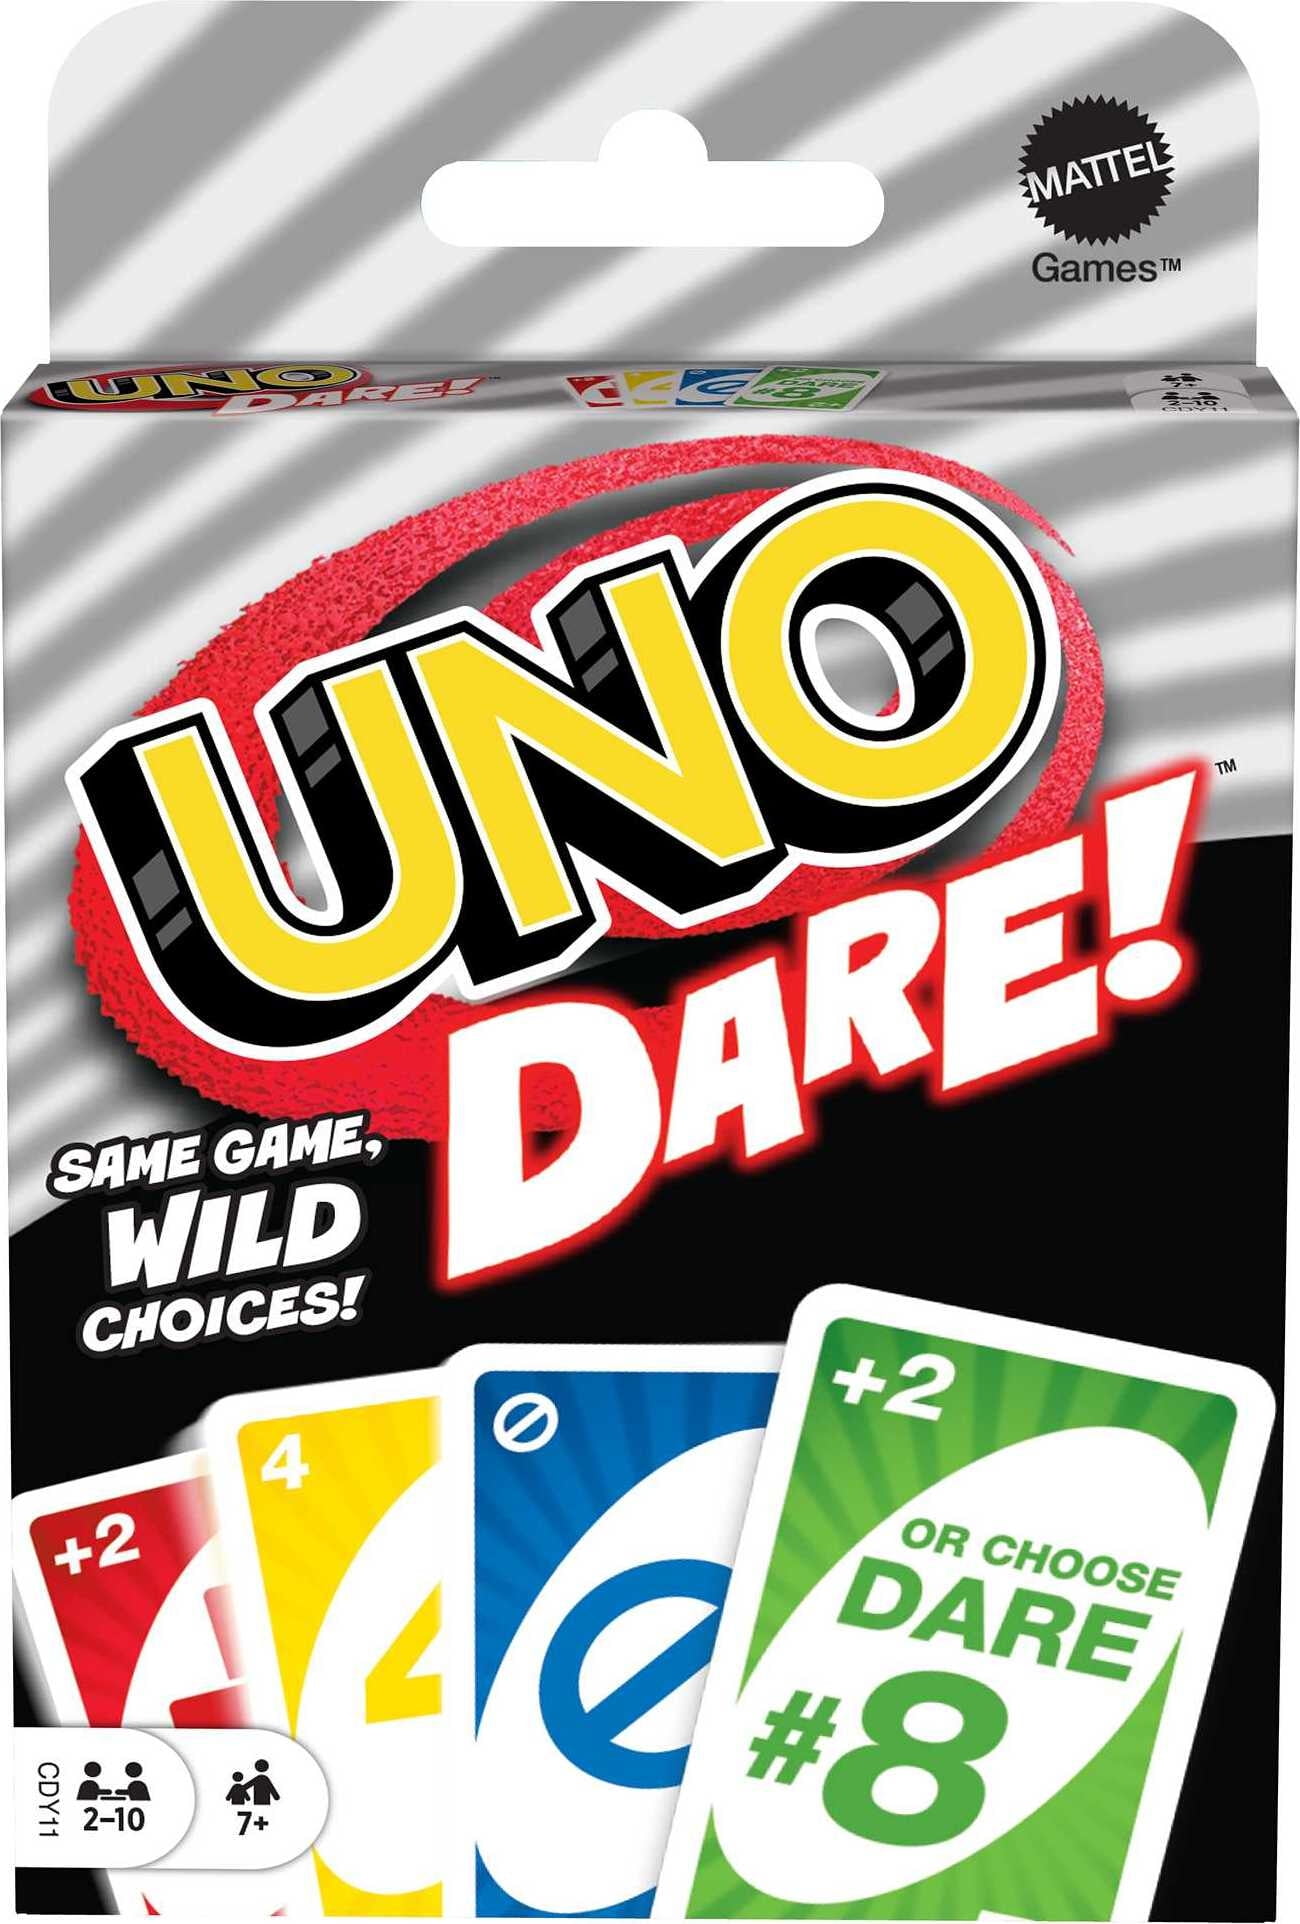 UNO Dare Wild Choices Card Game for 2-10 Players Ages 7Y+